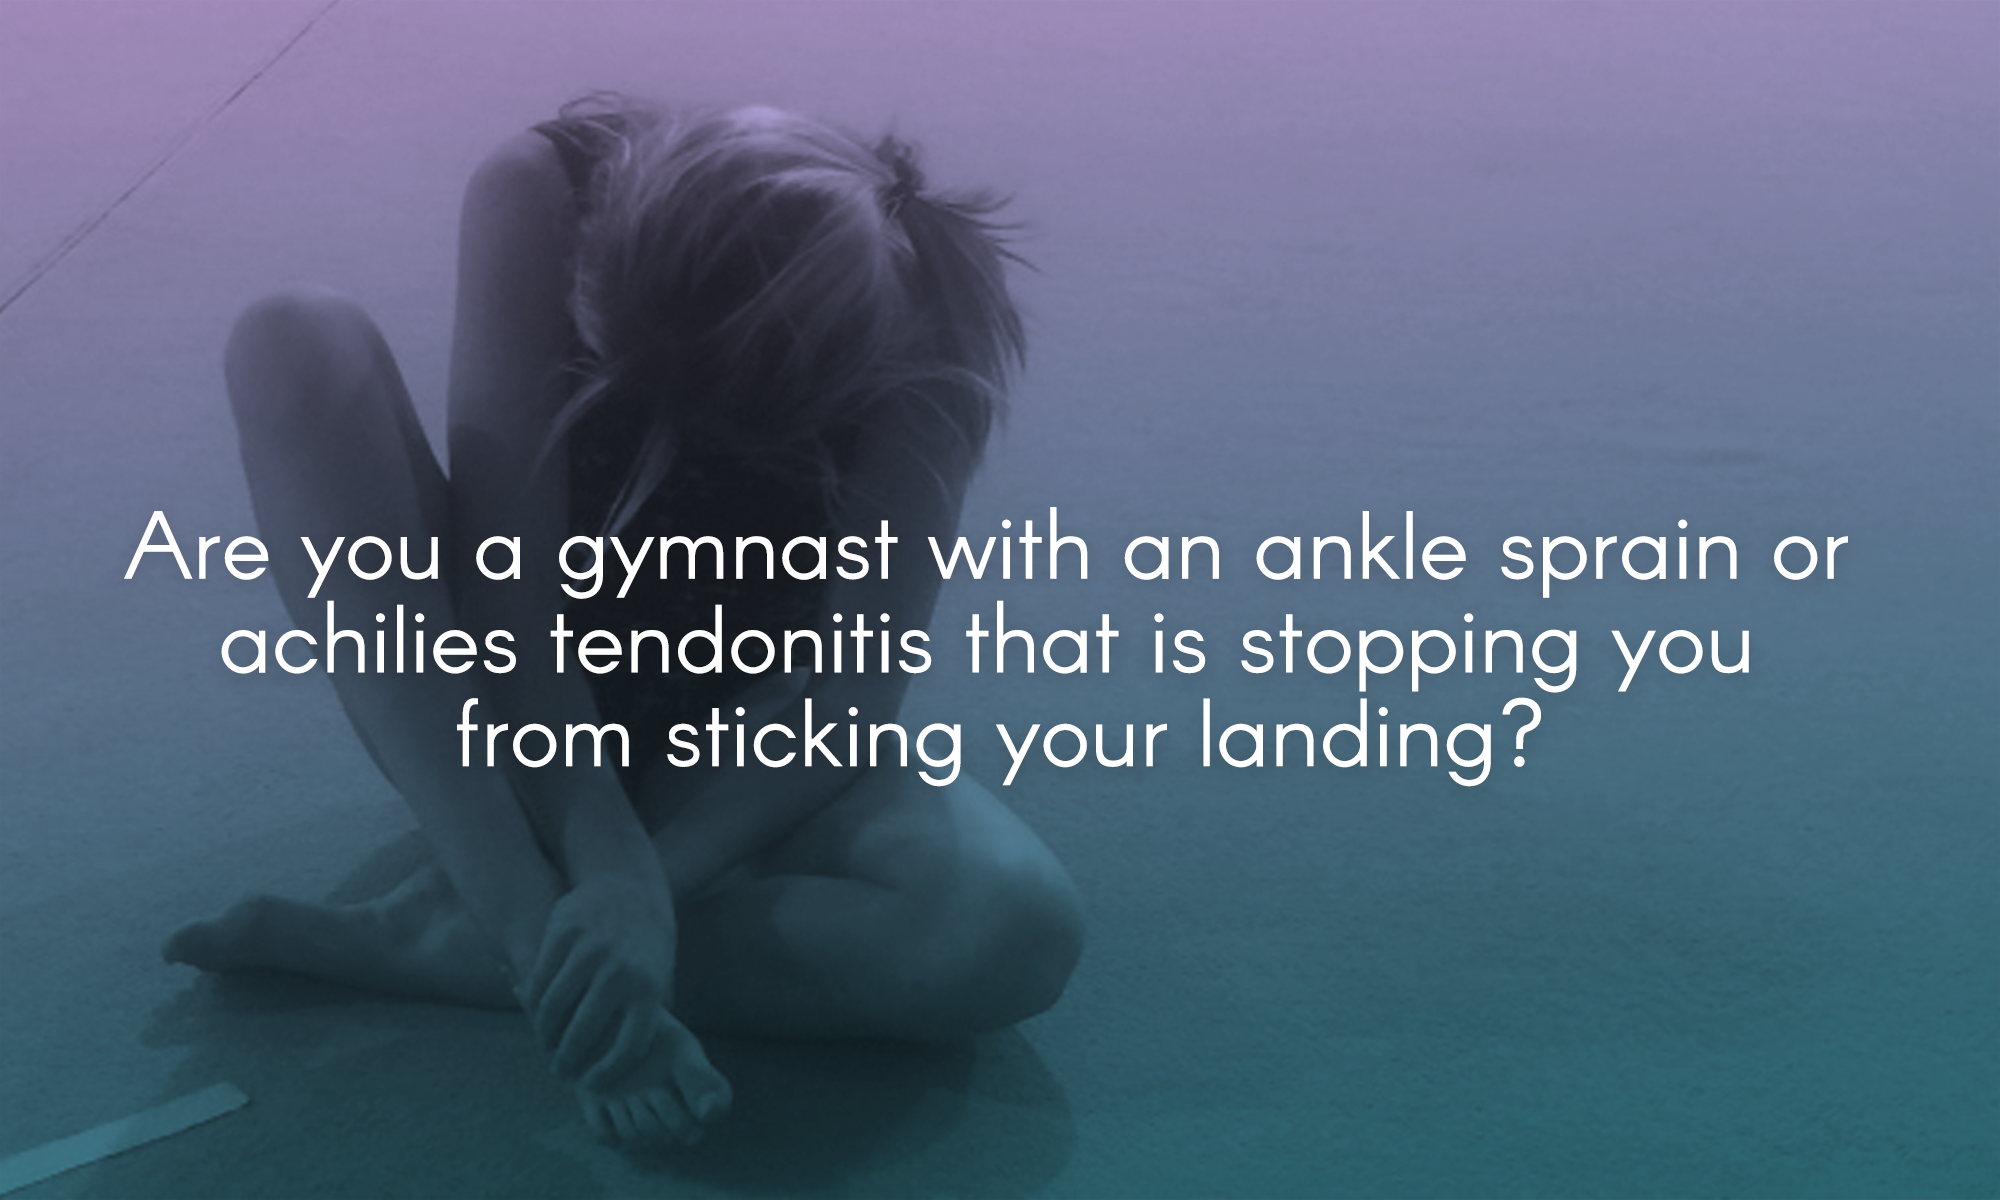  Are you a gymnast with an ankle sprain or achilies tendonitis that is stopping you from sticking your landing? 